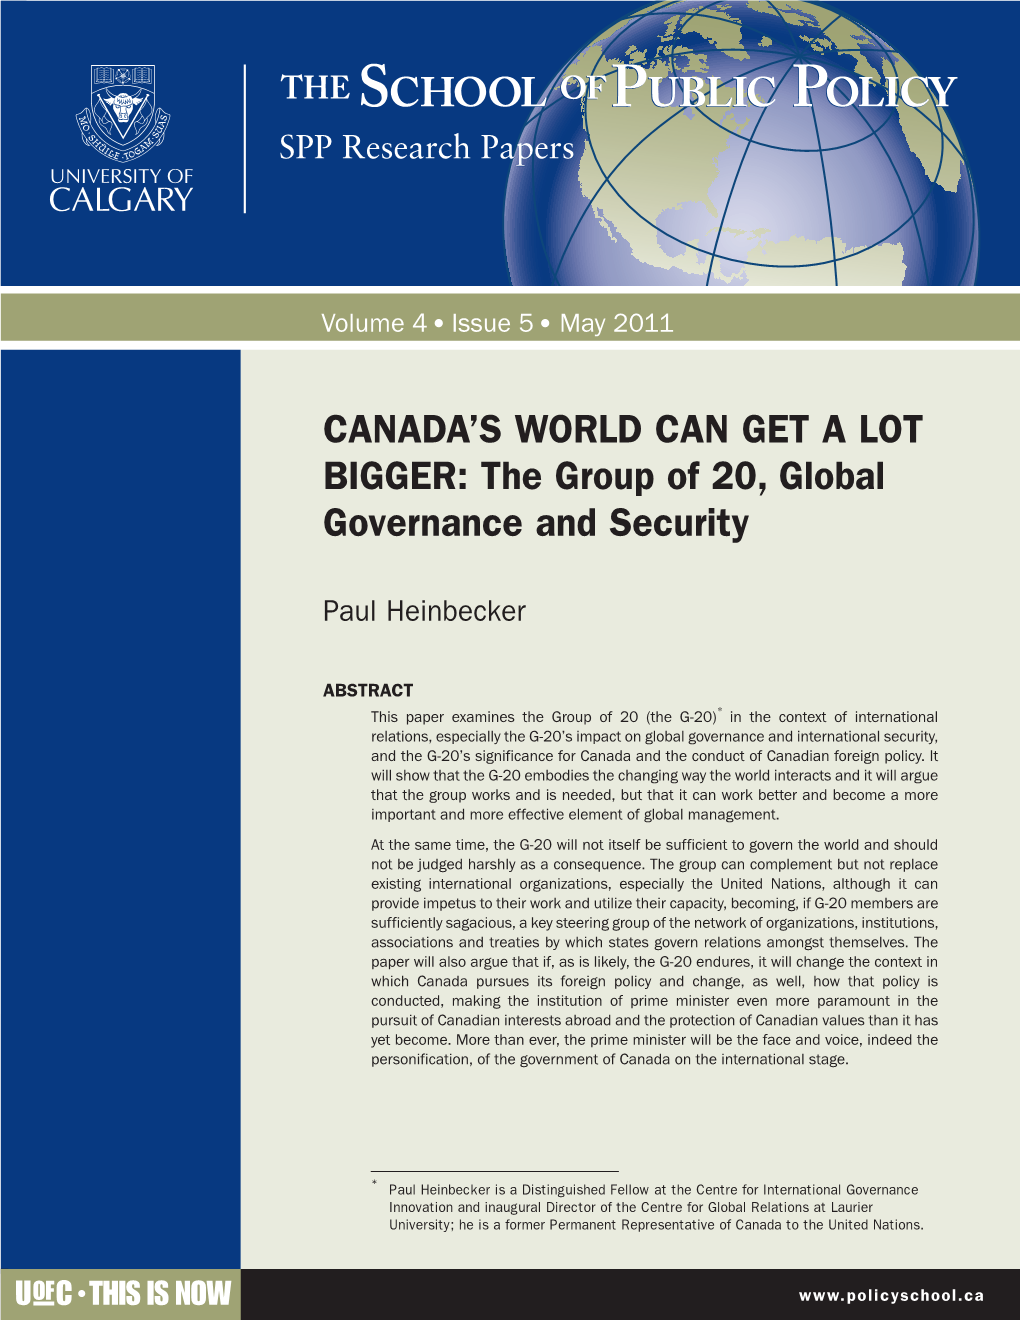 CANADA's WORLD CAN GET a LOT BIGGER: the Group of 20, Global